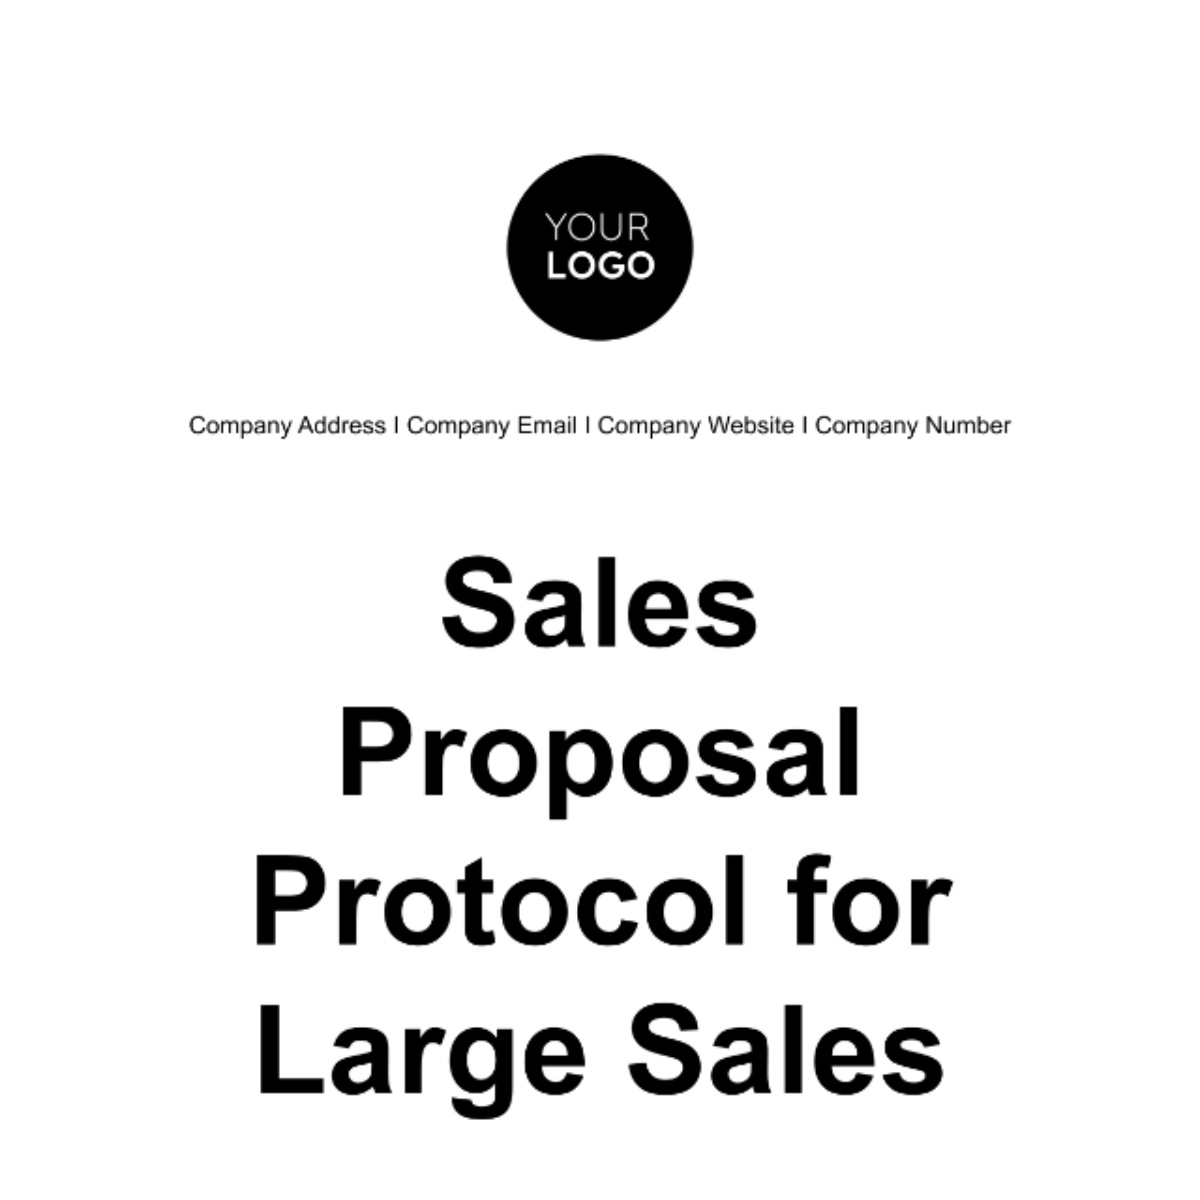 Free Sales Proposal Protocol for Large Sales Template